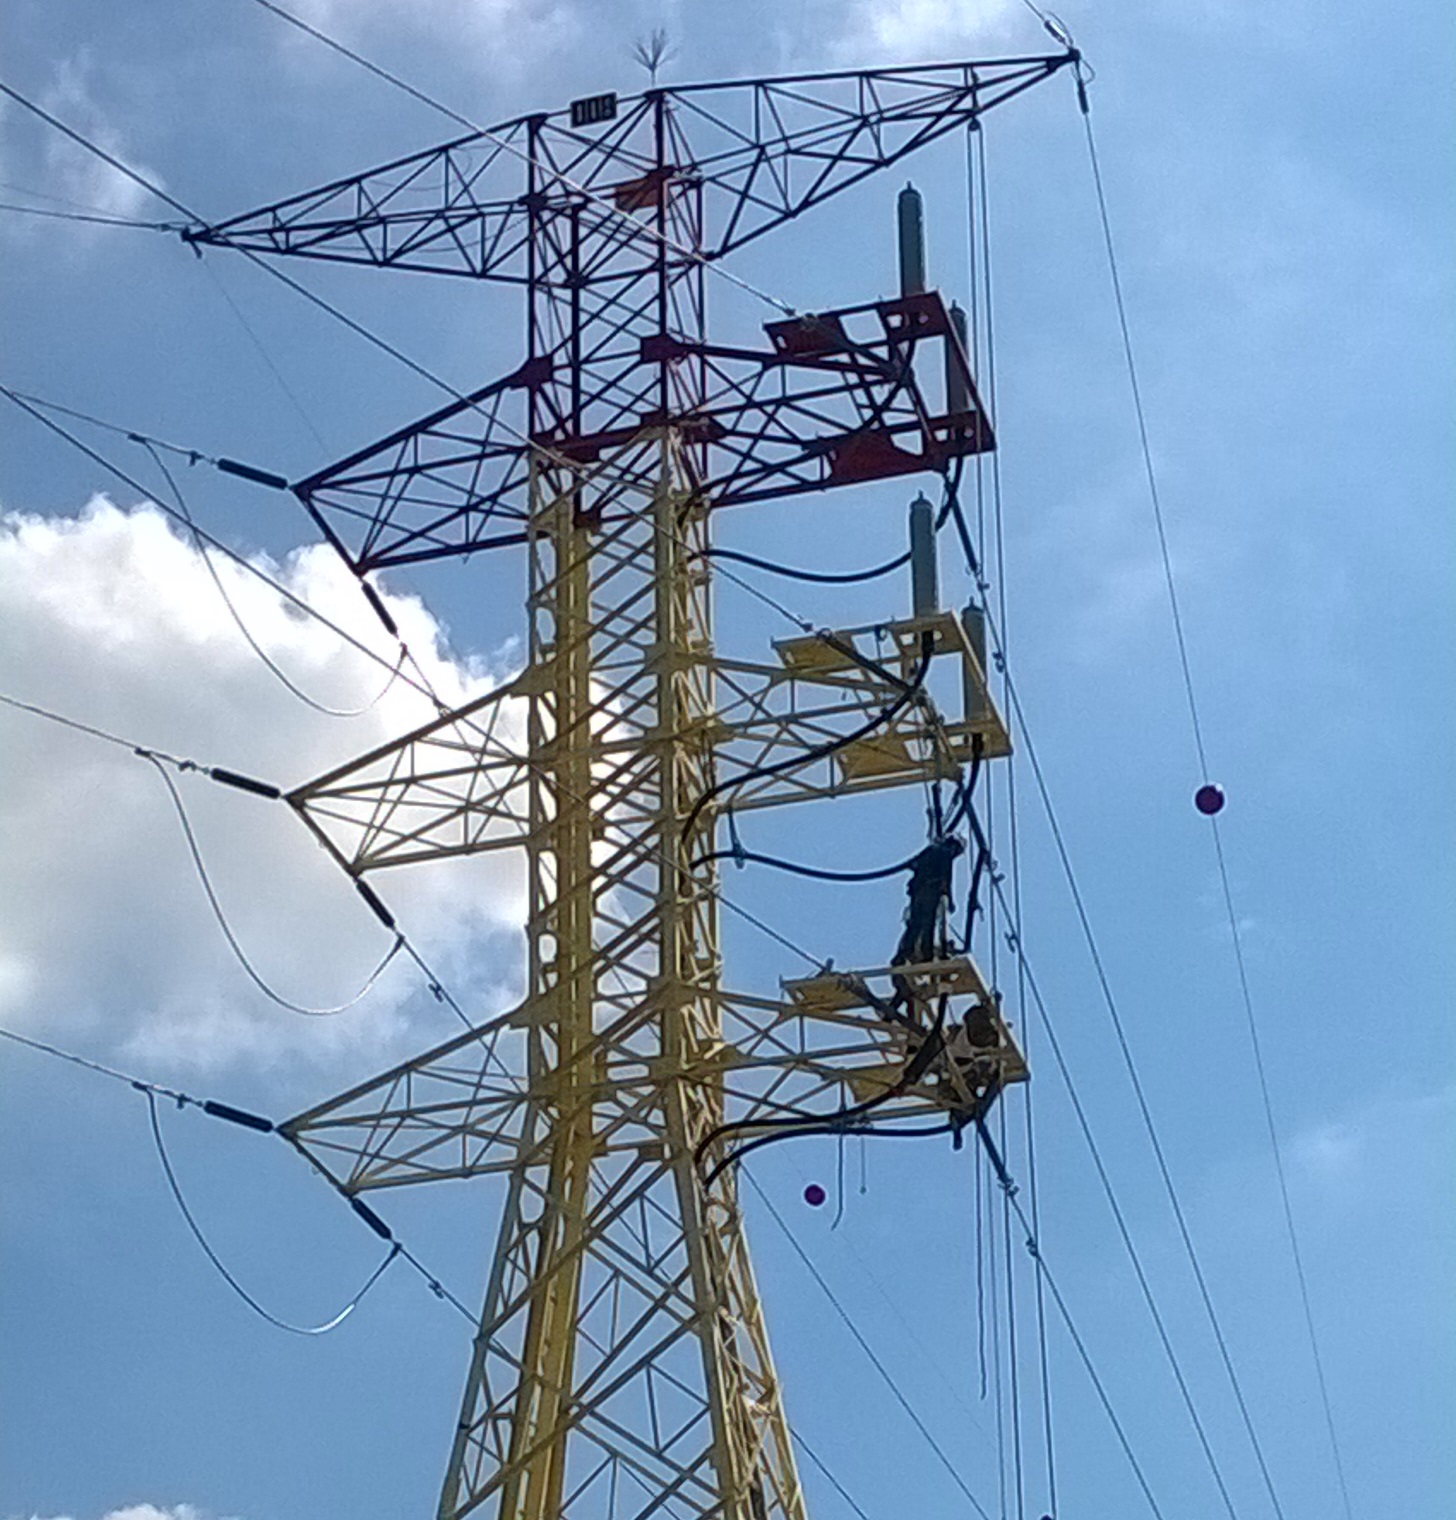 FCC Industrial completes the electrical substation and high-voltage lines of the  South distribution phase III  project in Veracruz, Mexico